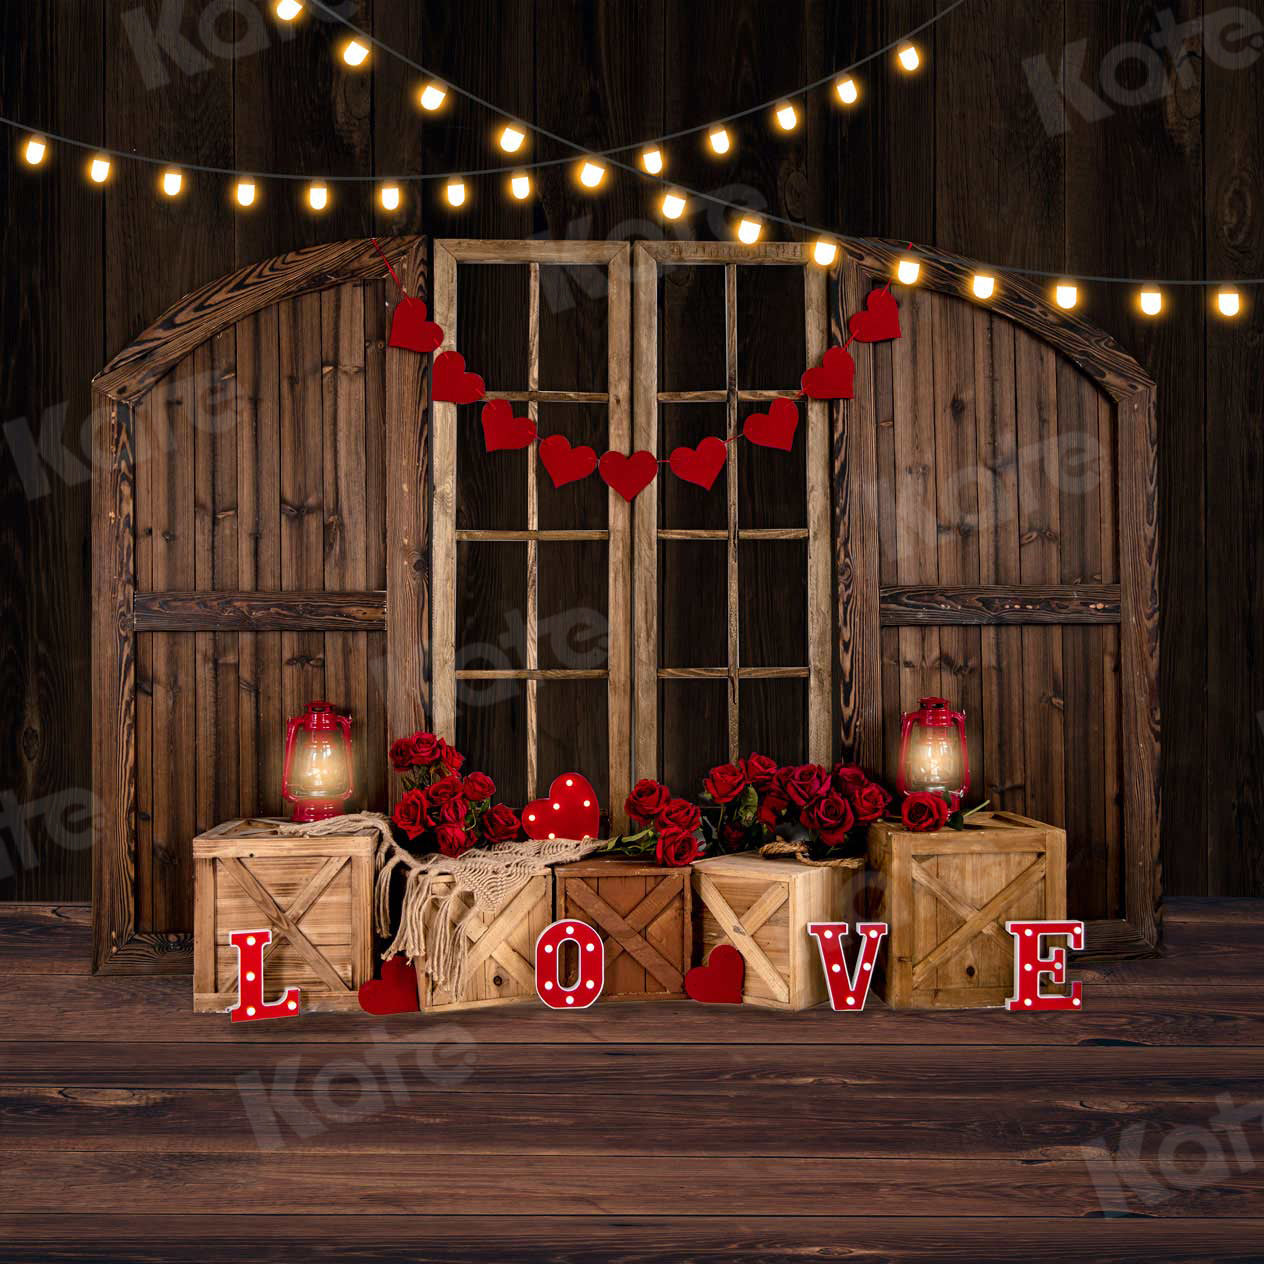 Kate Valentine's Day Backdrop Wooden Door Small Lamp Rose Fabric Backdrops Kevin10